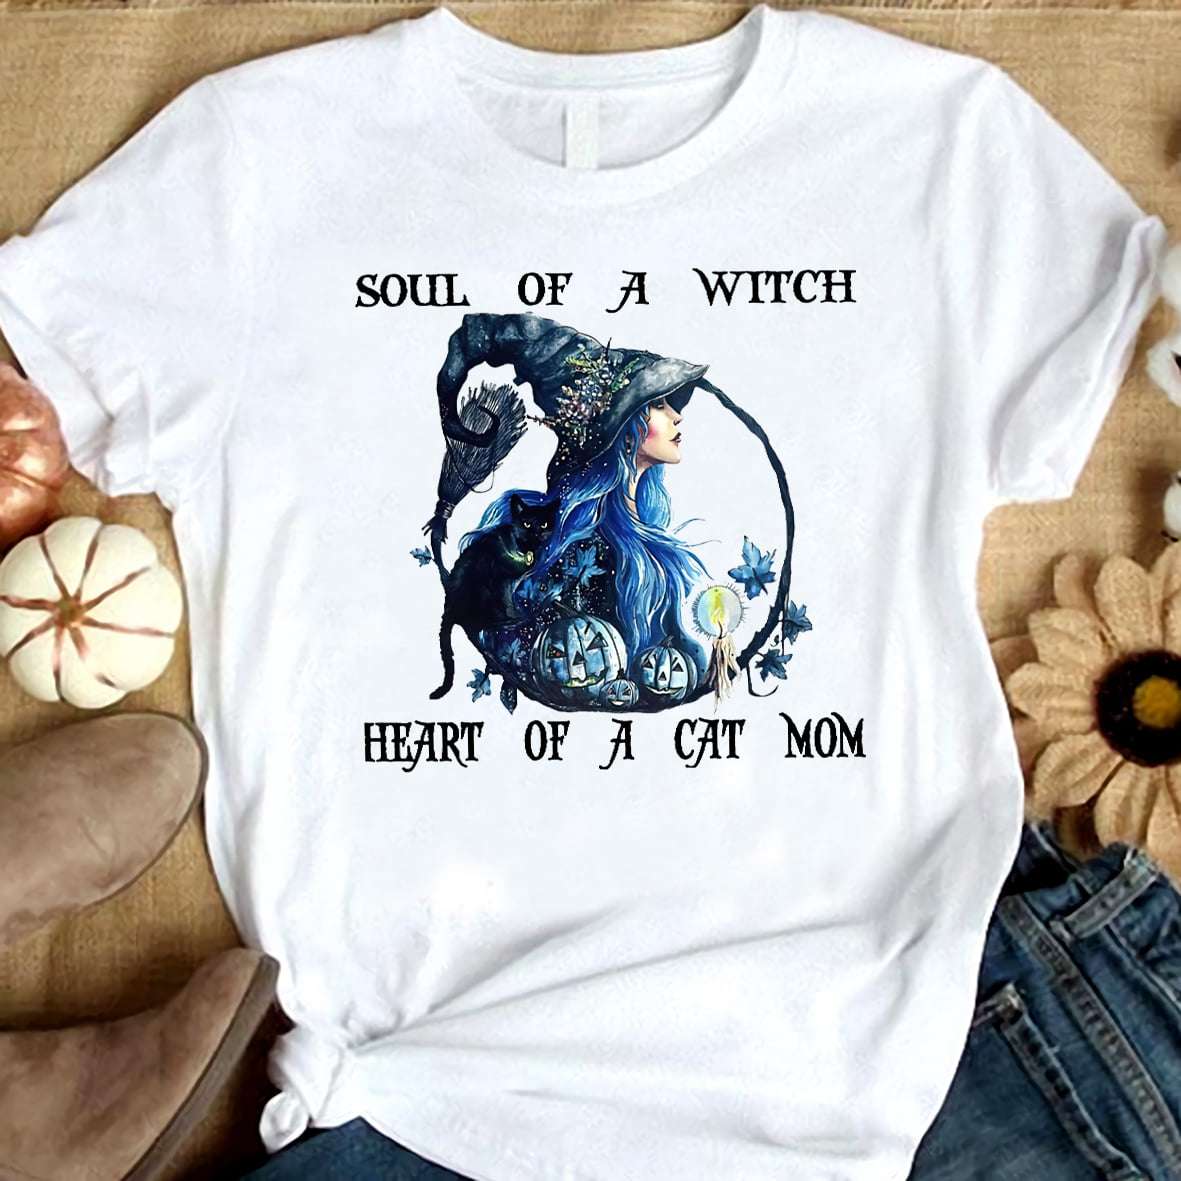 Soul of a witch heart of a cat mom - Witch cat mom, witch halloween costume